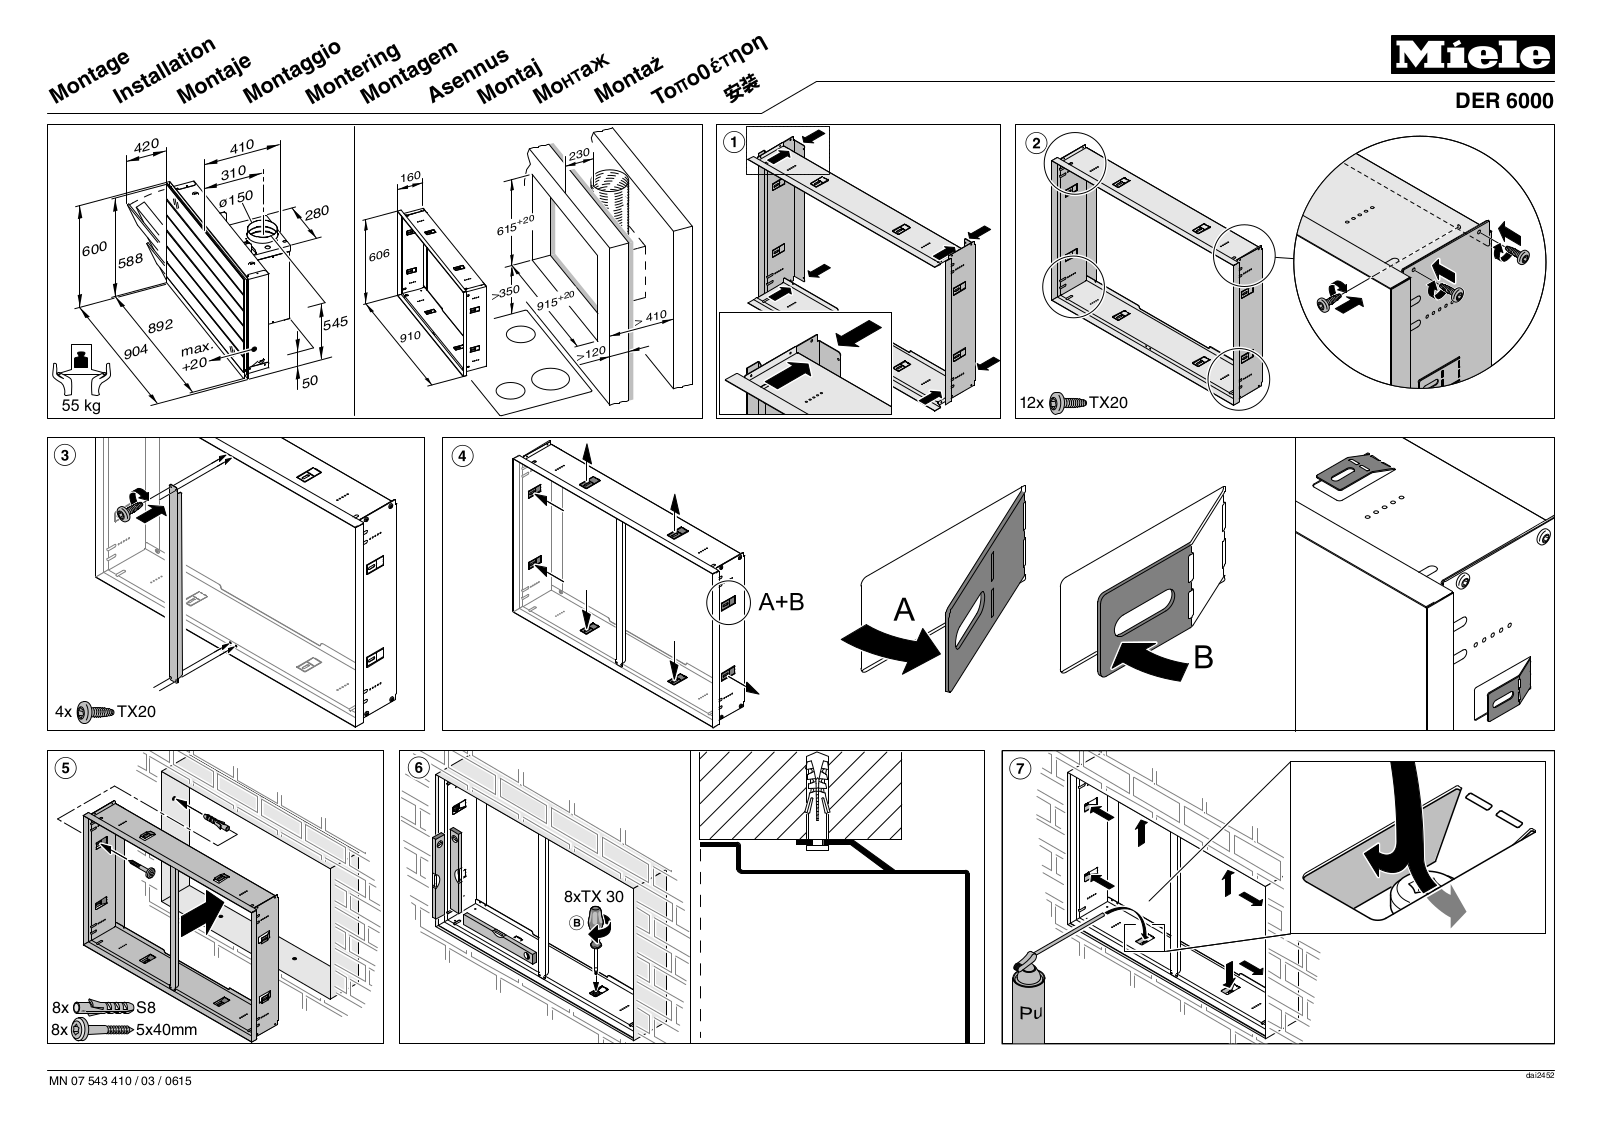 Miele DER 6000 Assembly Instructions